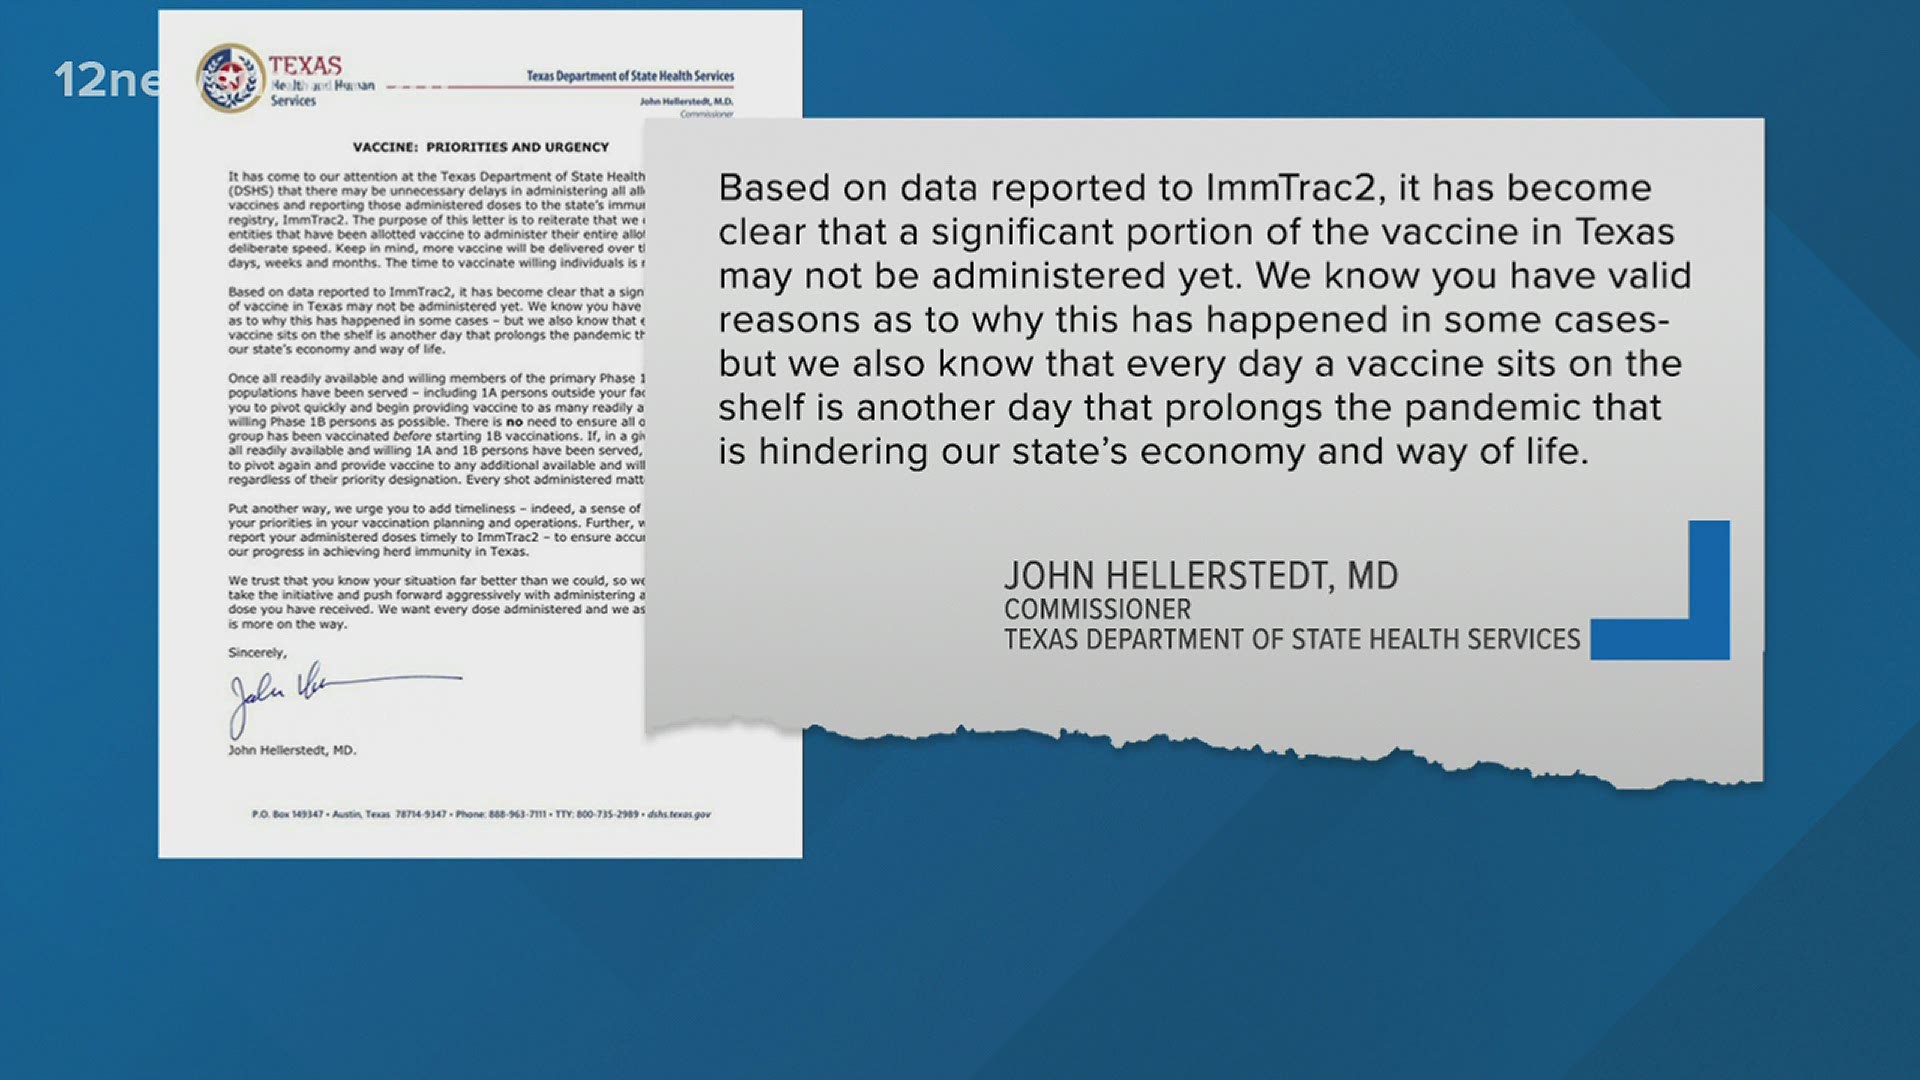 A letter issued by Dr. Hellerstedt is urging entities with the vaccine to quickly administer them to end the pandemic as quickly as possible